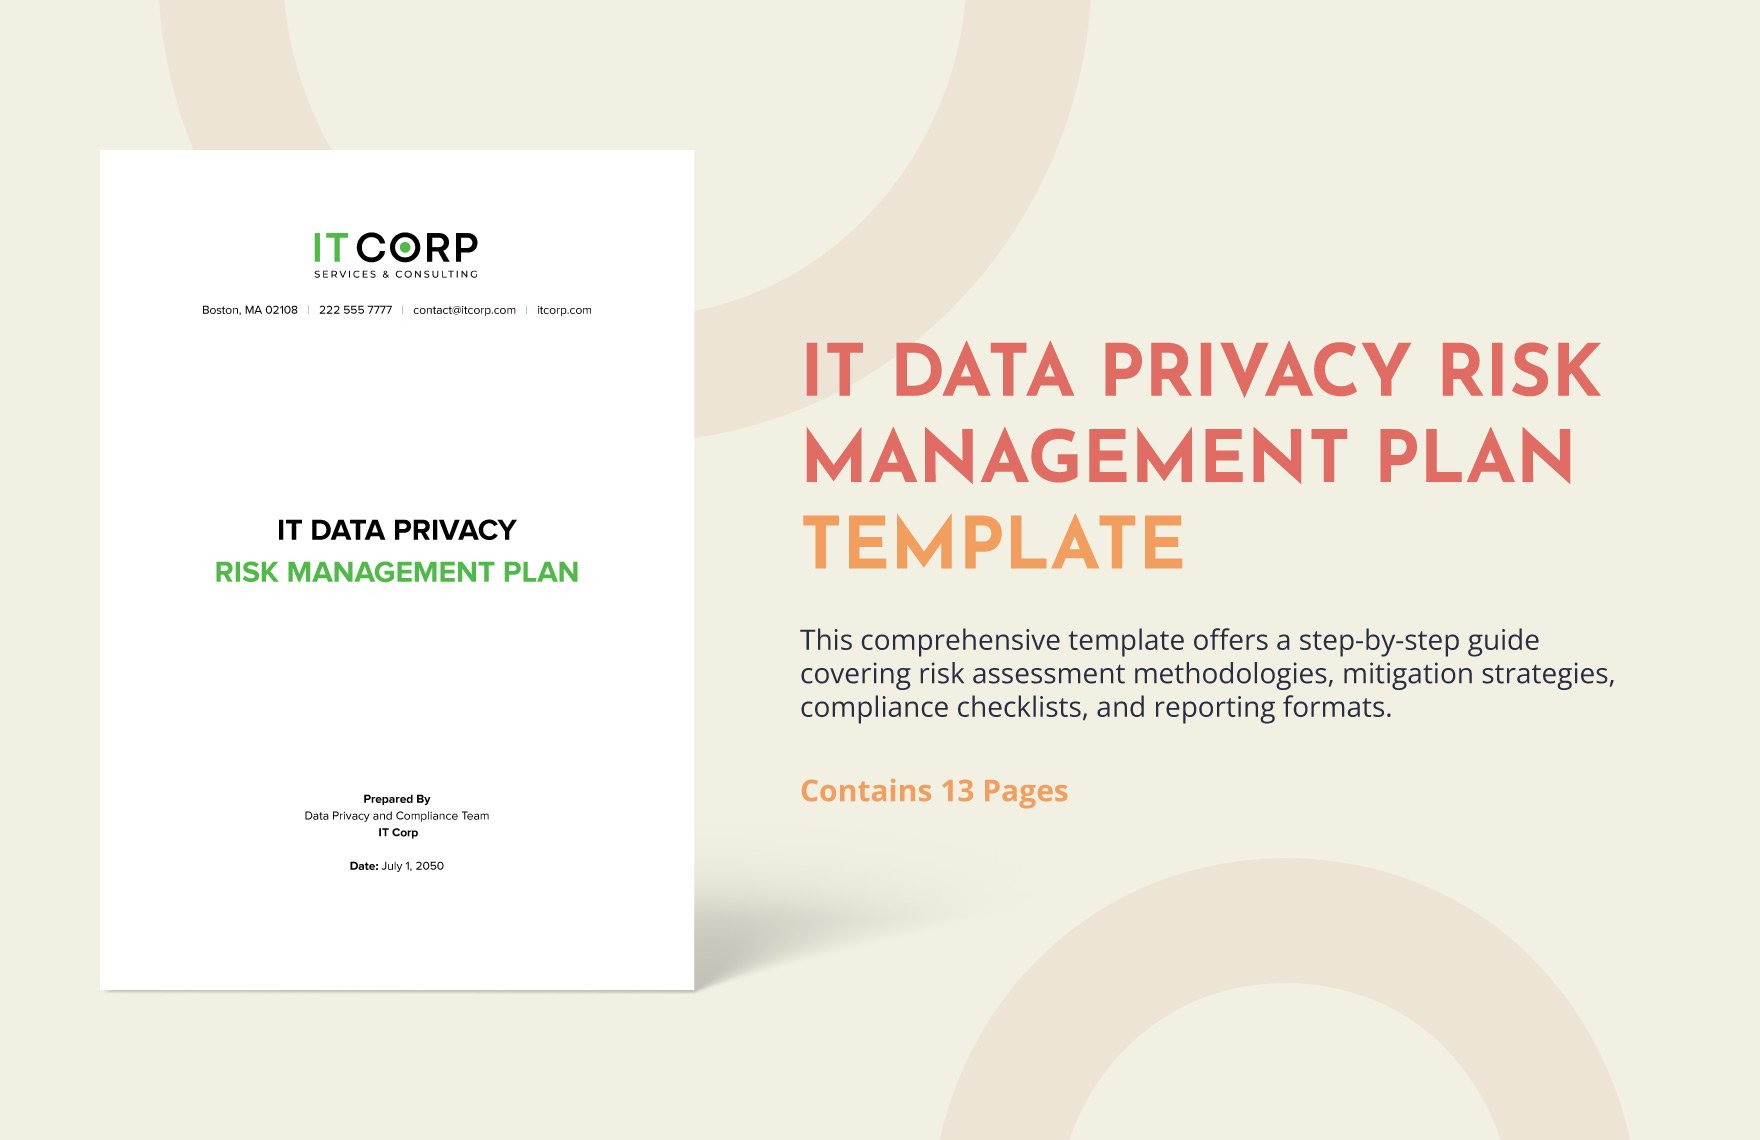 IT Data Privacy Risk Management Plan Template